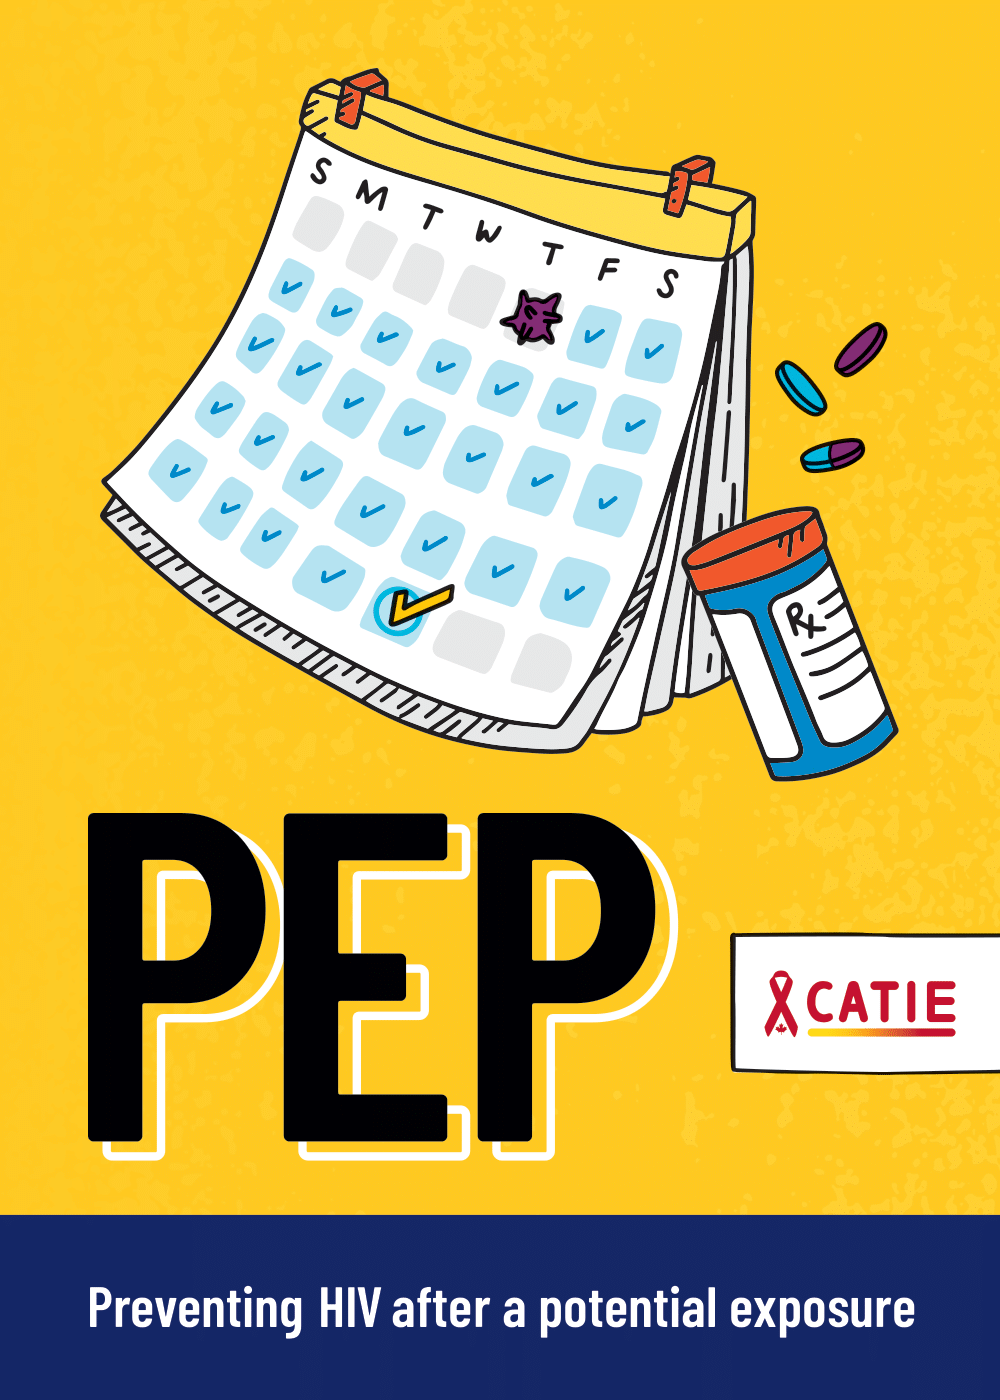 PEP: Preventing HIV after a potential exposure